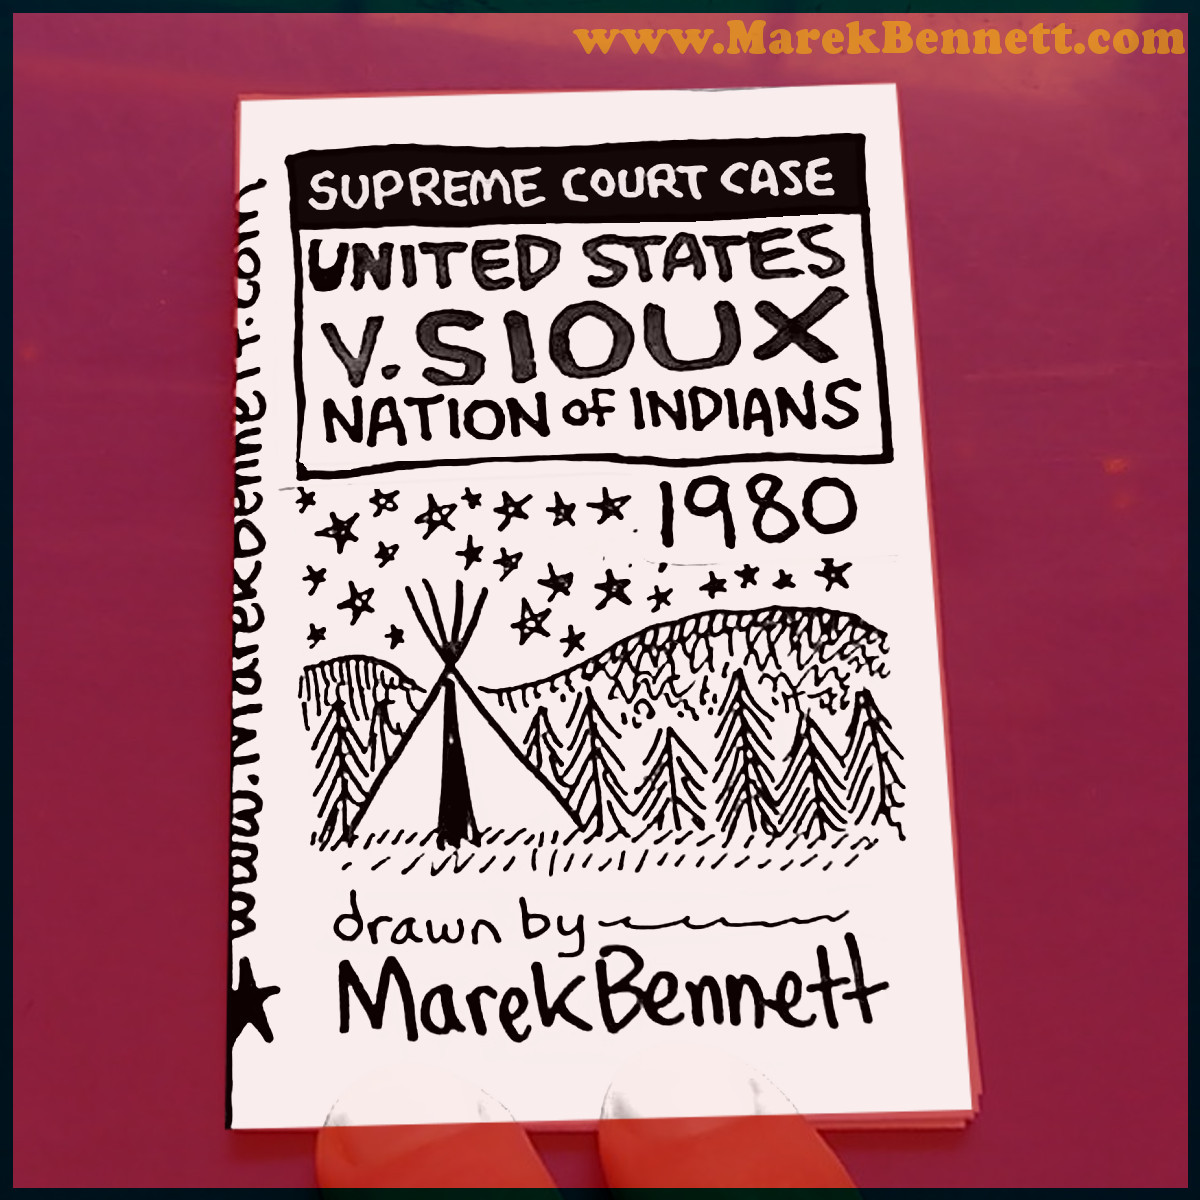 SUPREME COURT MINI: United States V. Sioux Nation of Indians (1980)